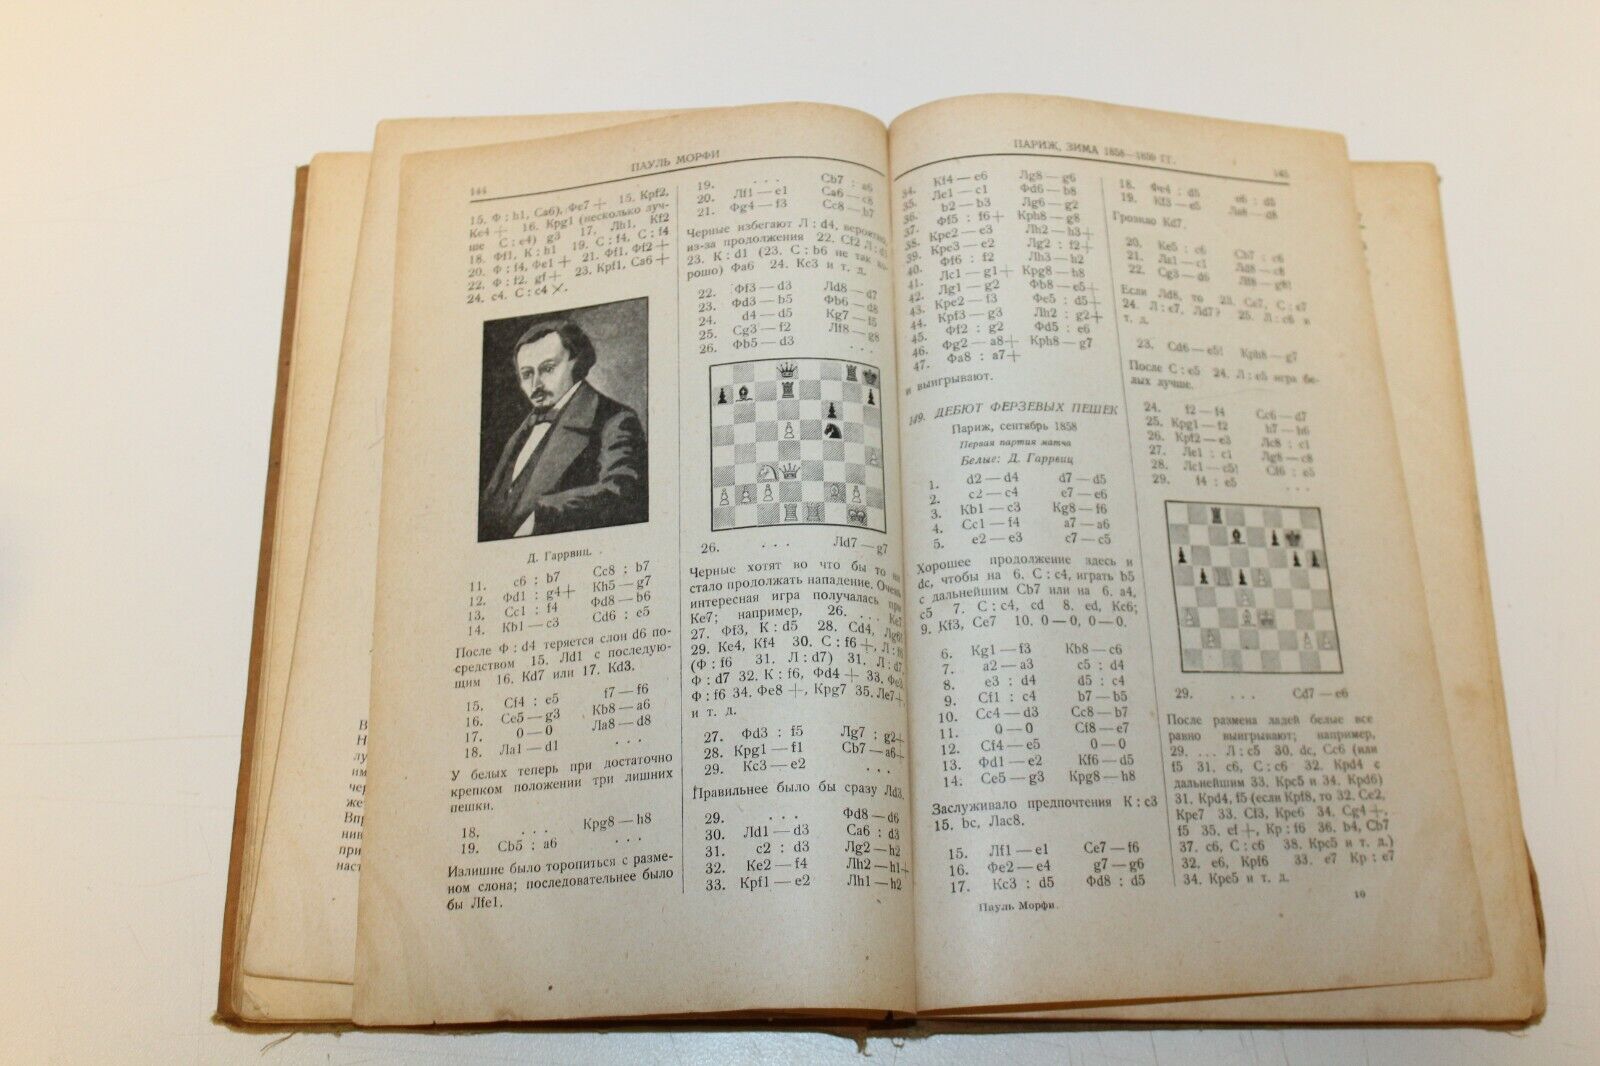 Antique Russian Chess Book: G. Marozzi. Chess games of Paul Morphy. 1929